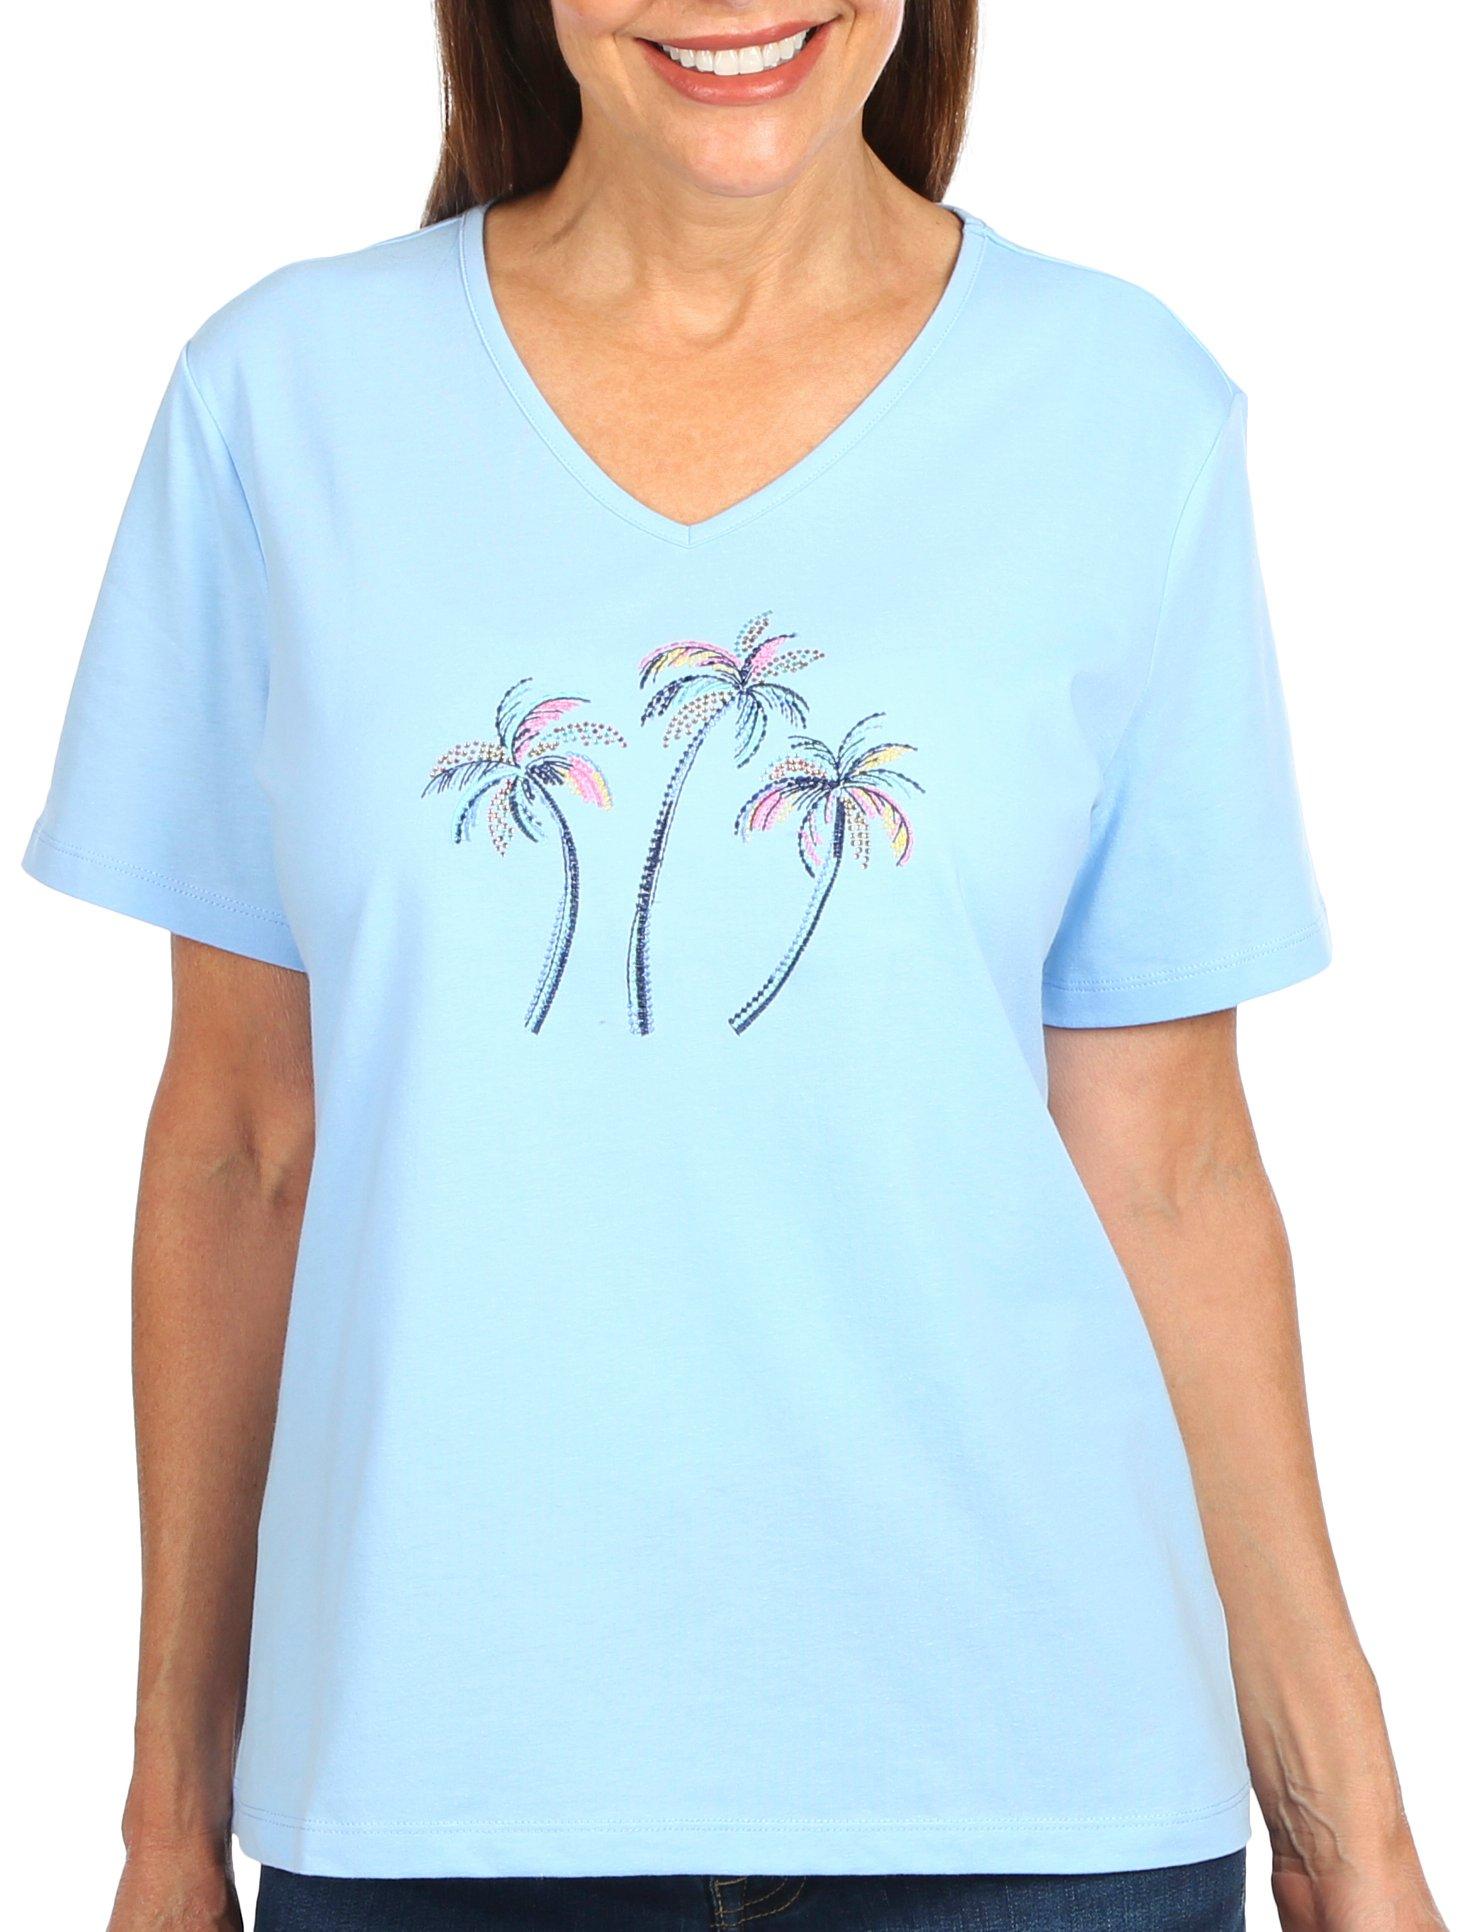 Coral Bay Petite Palm Embellished Solid Short Sleeve Top